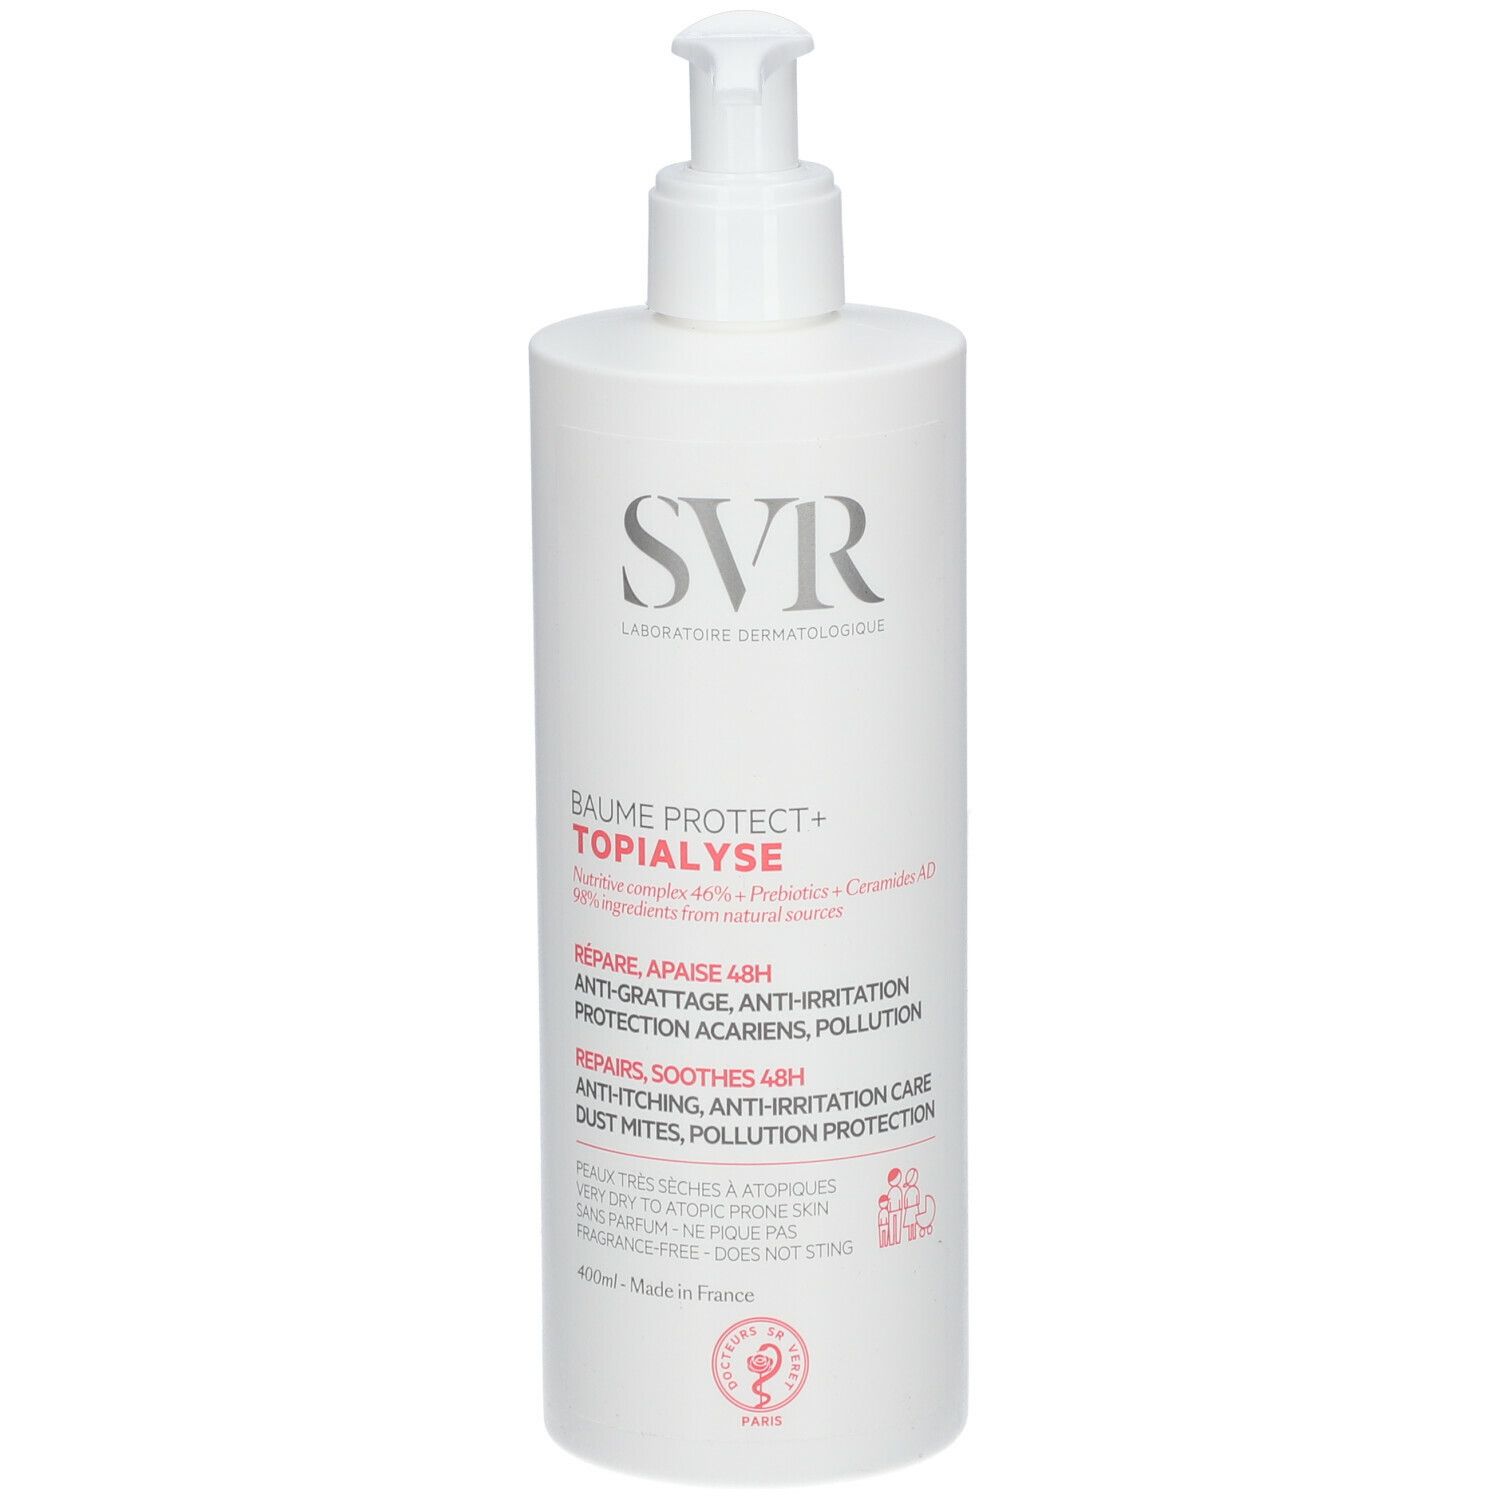 SVR Topialyse Baume Protect